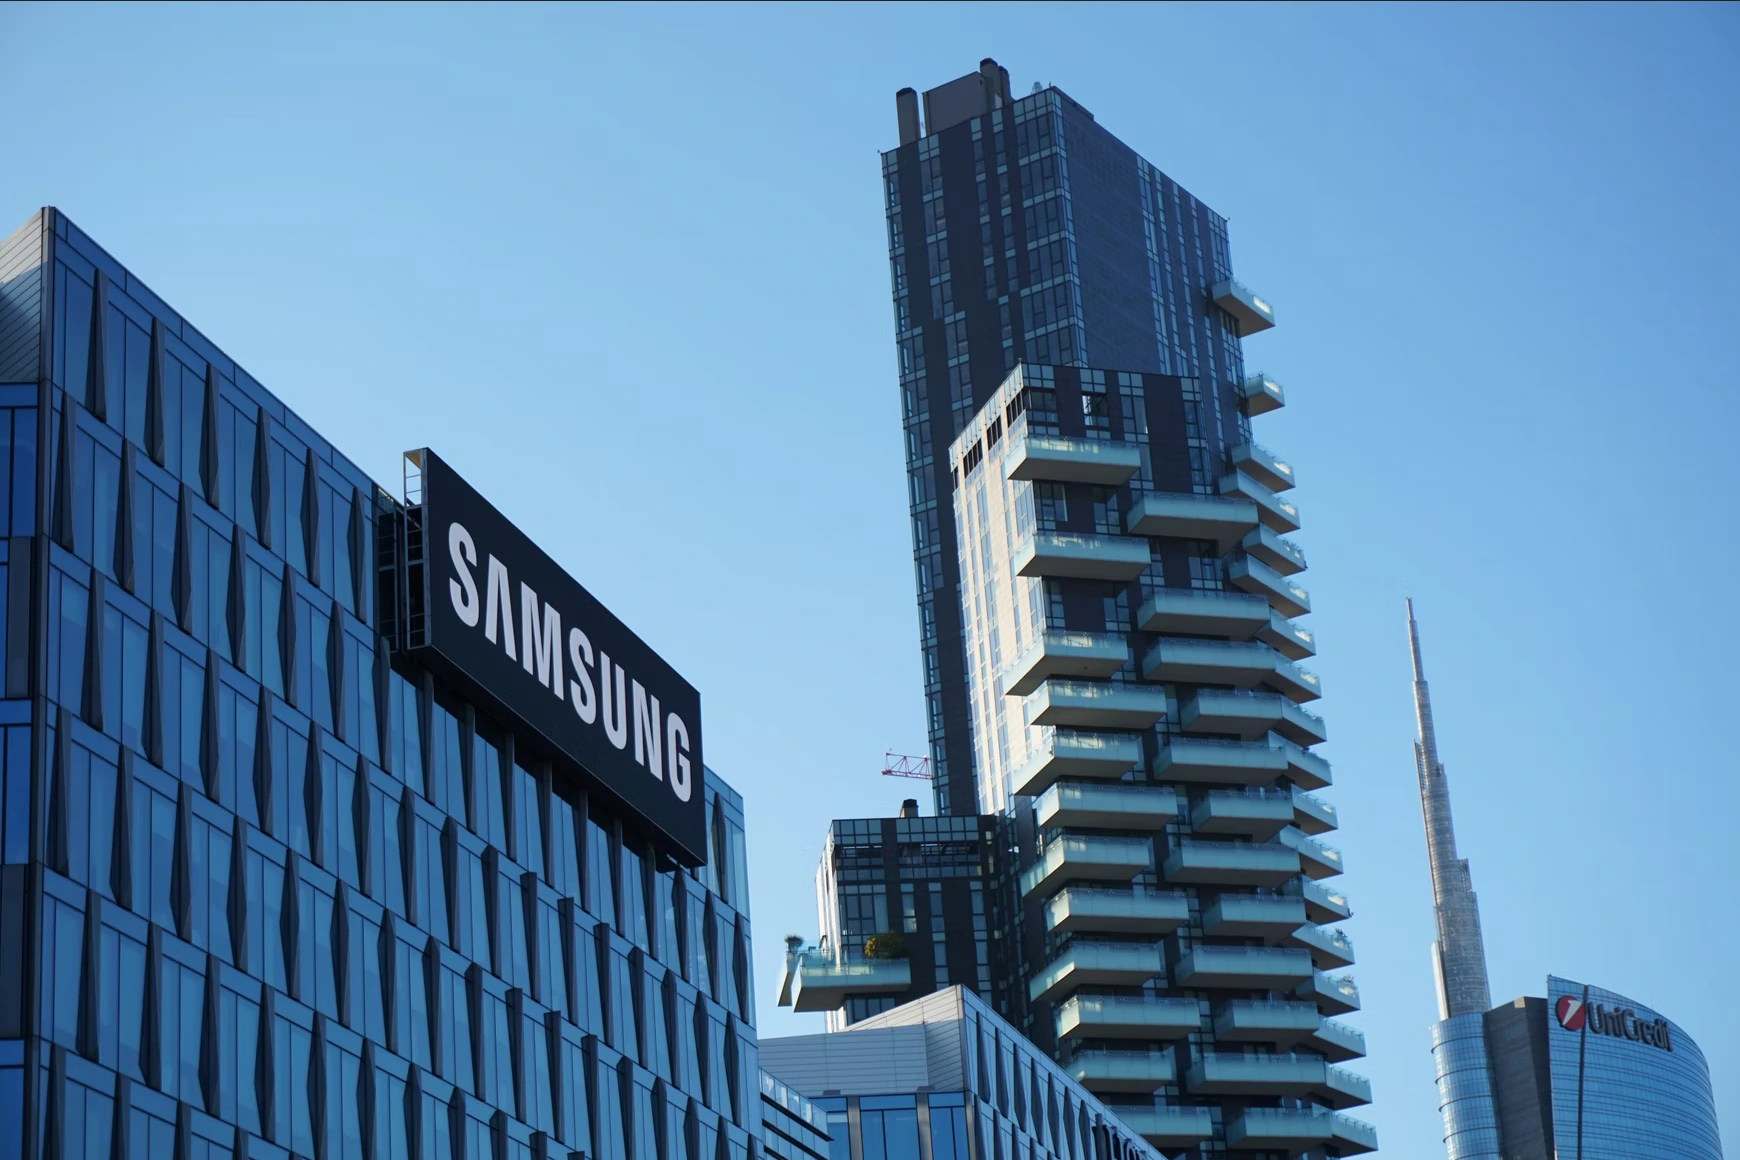 Samsung shows 12 percent profit growth but warns of weak demand for mobile devices and PCs